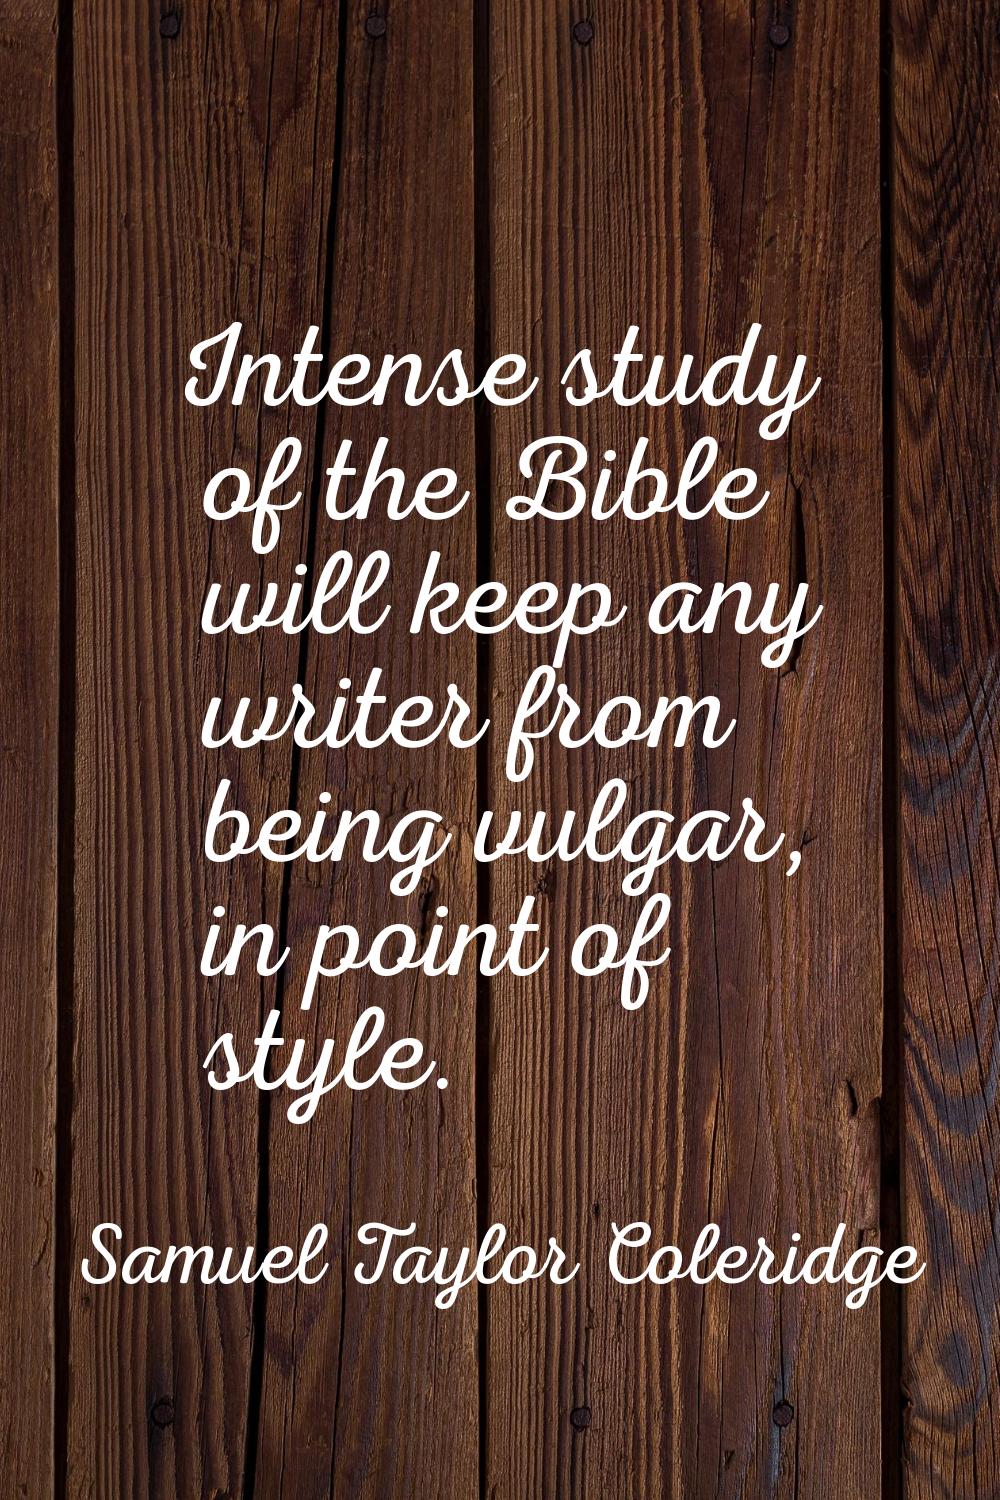 Intense study of the Bible will keep any writer from being vulgar, in point of style.